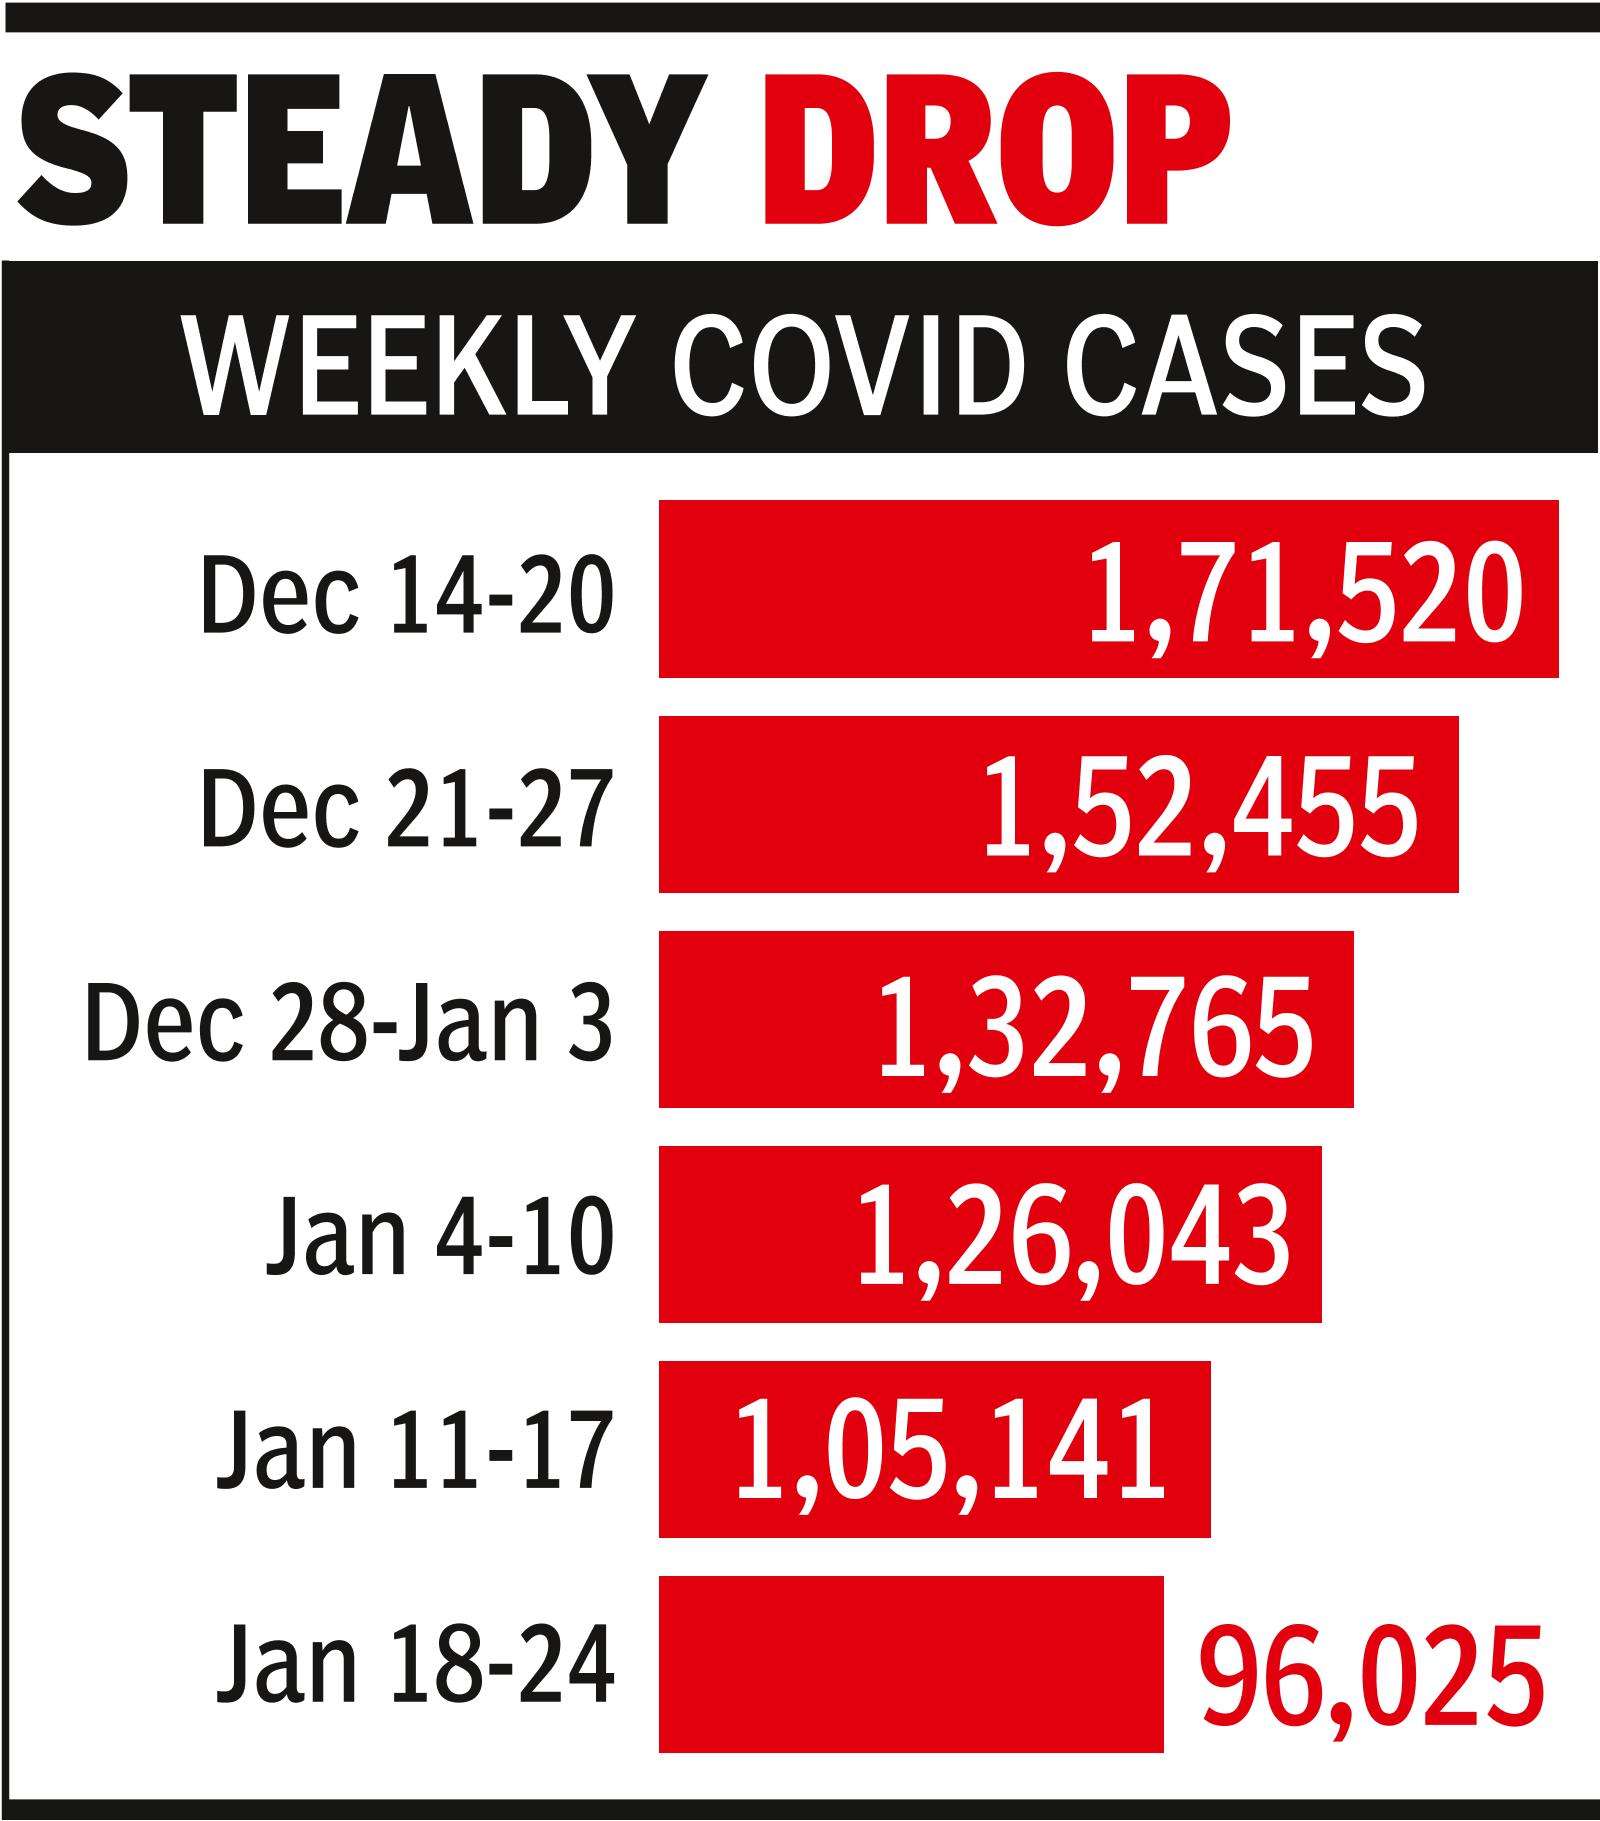 After 7 months, India’s weekly Covid cases fall below 1 lakh